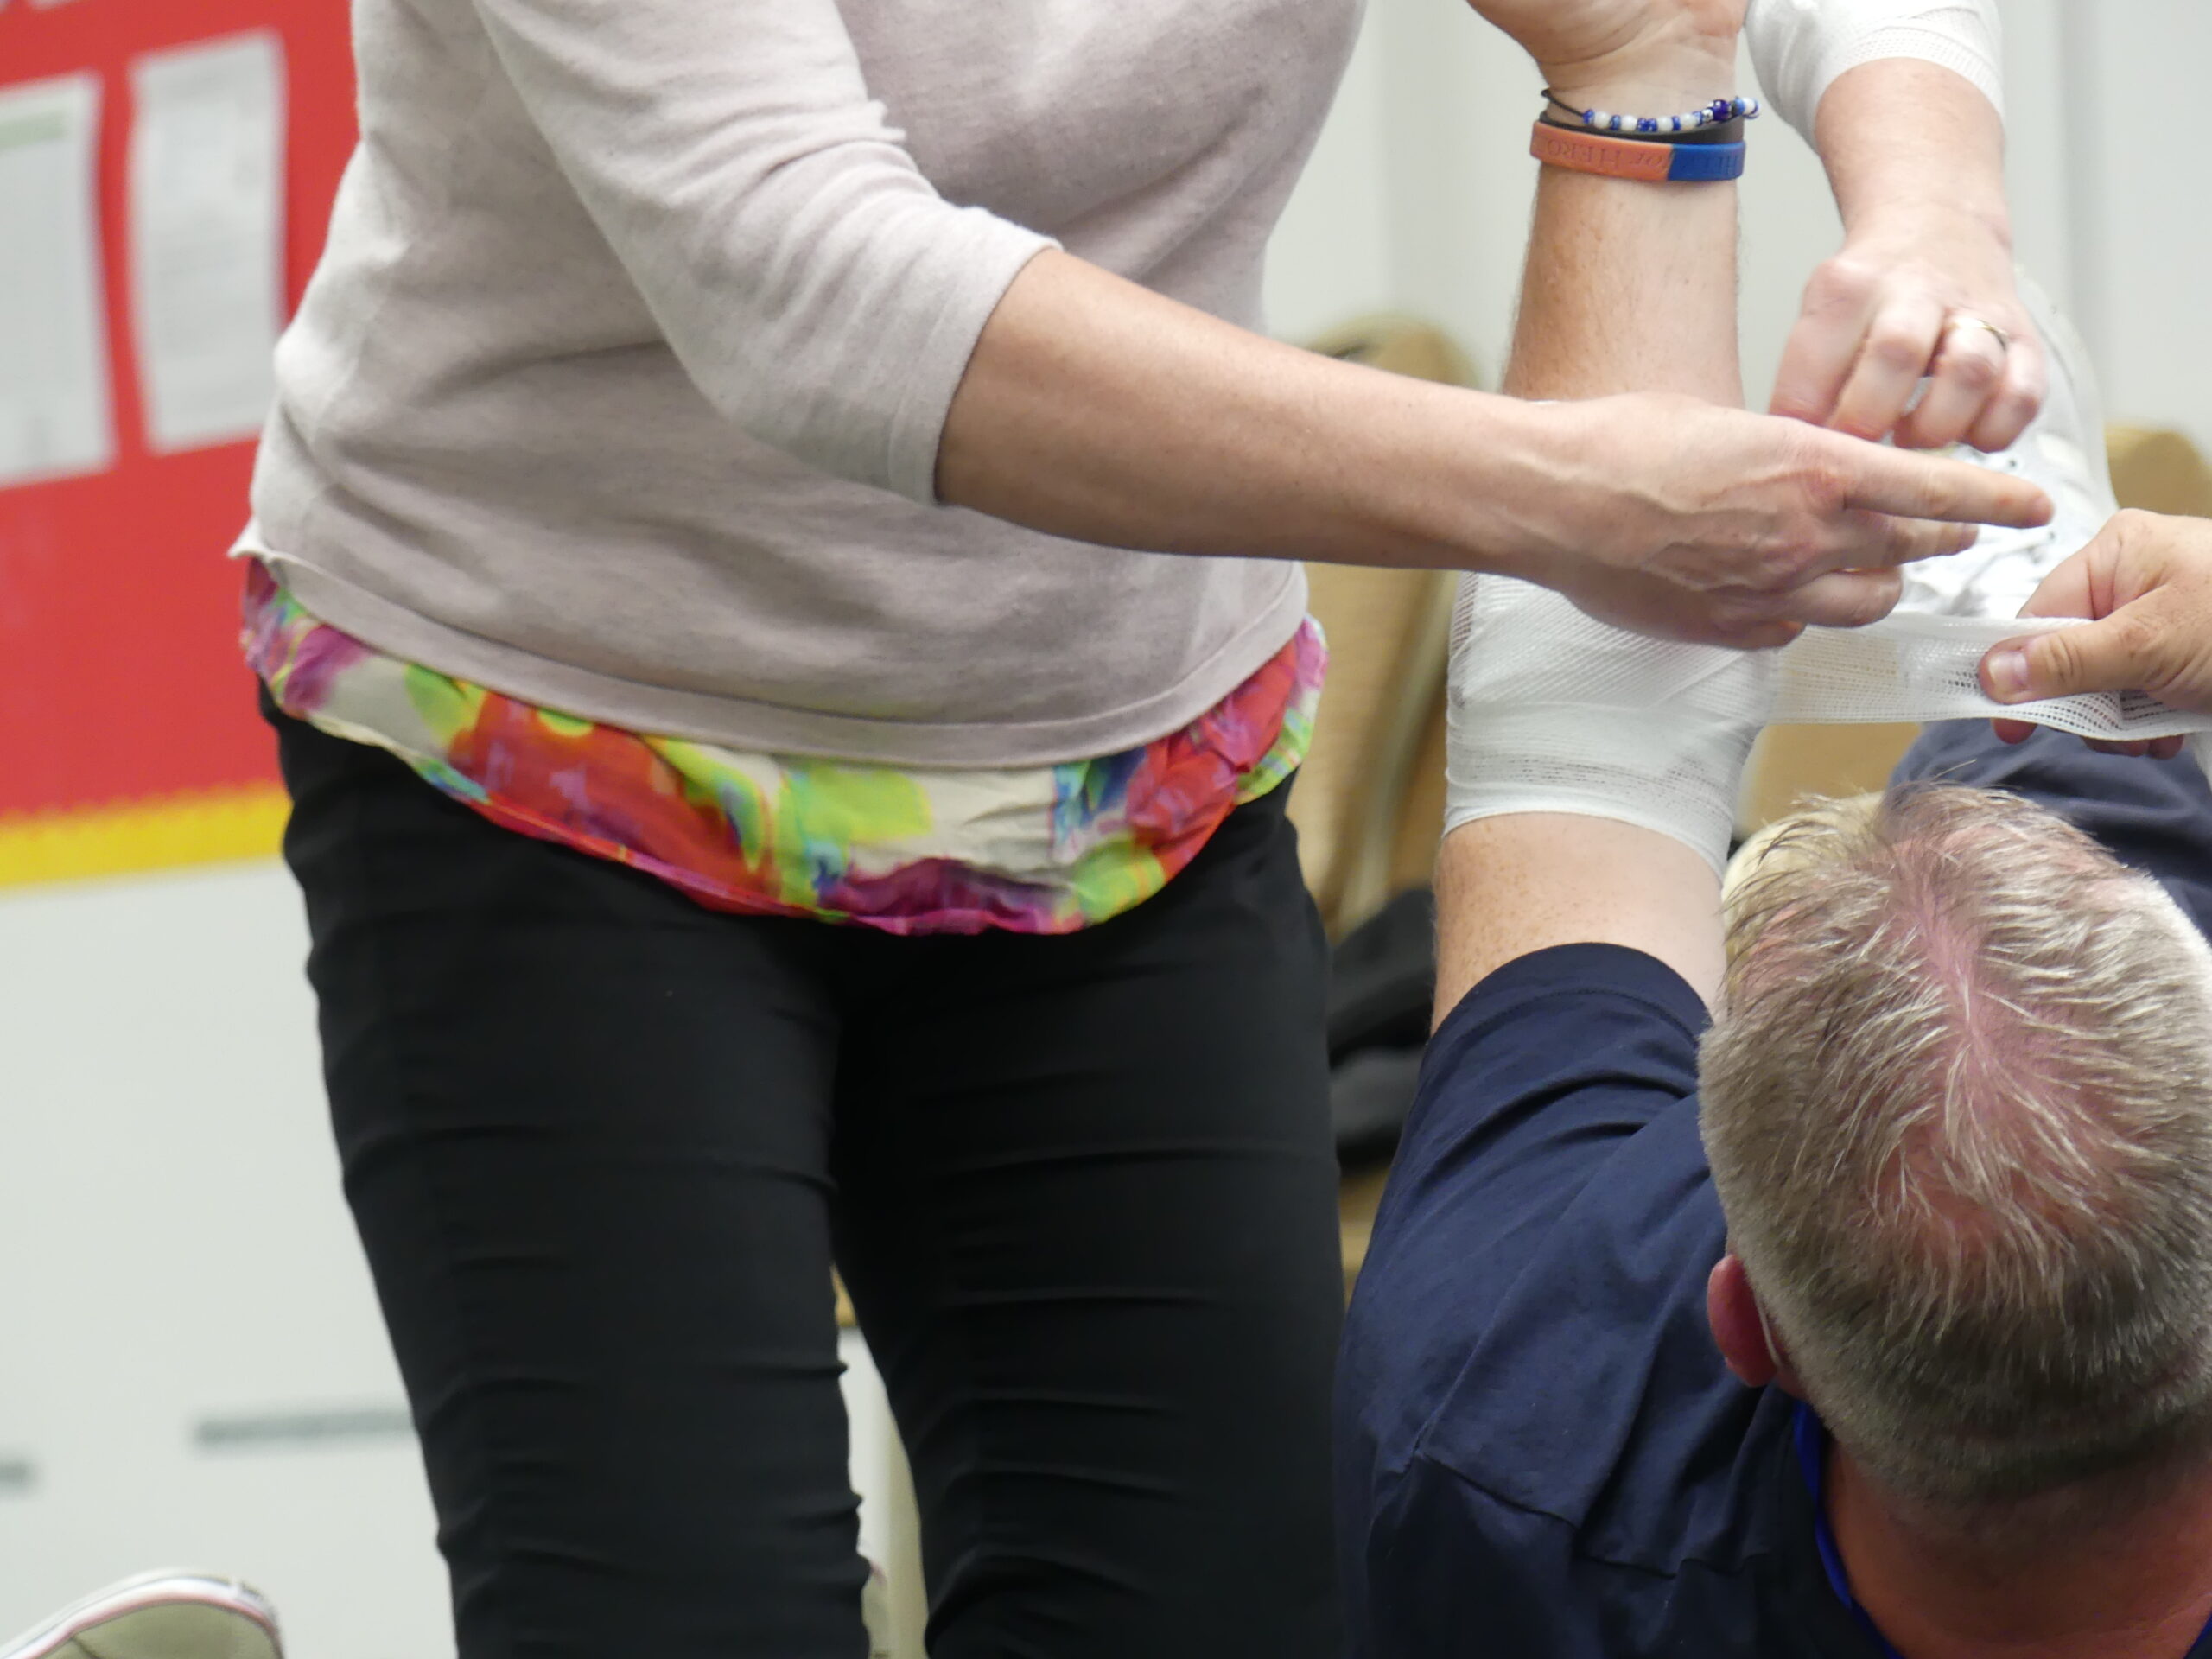 Learner practicing an arm dressing on a first aid course